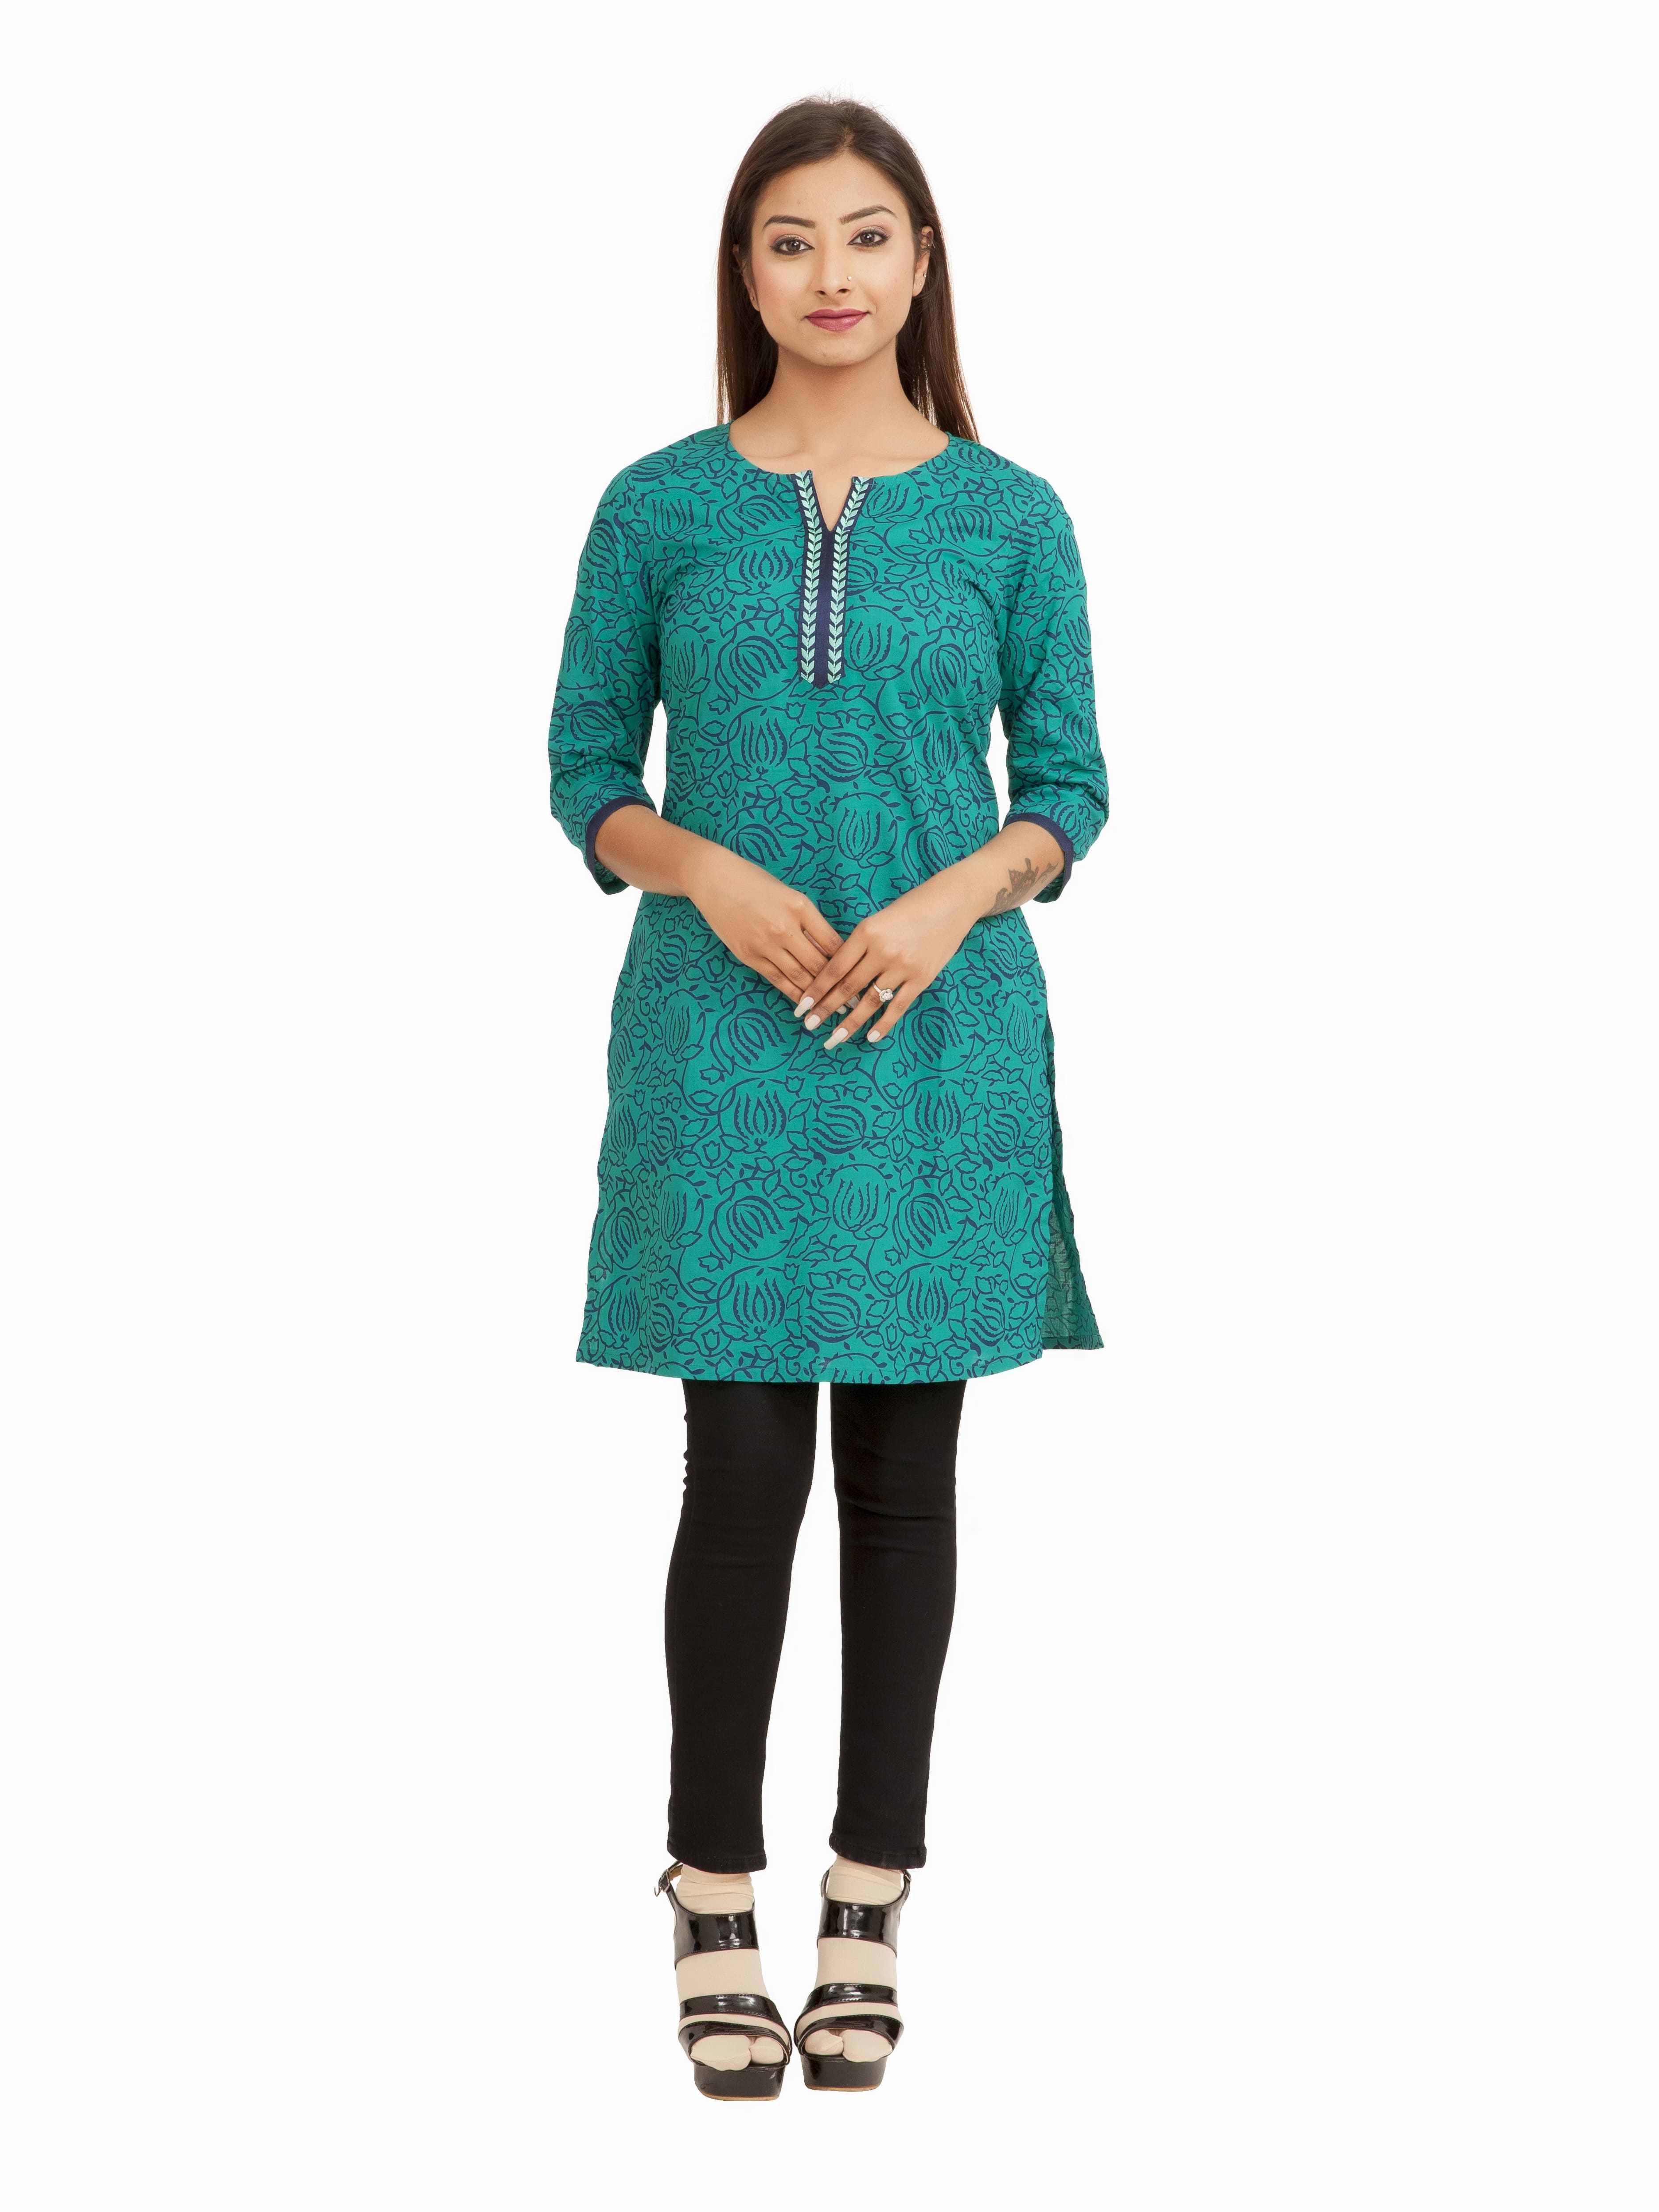 clothing suppliers in india